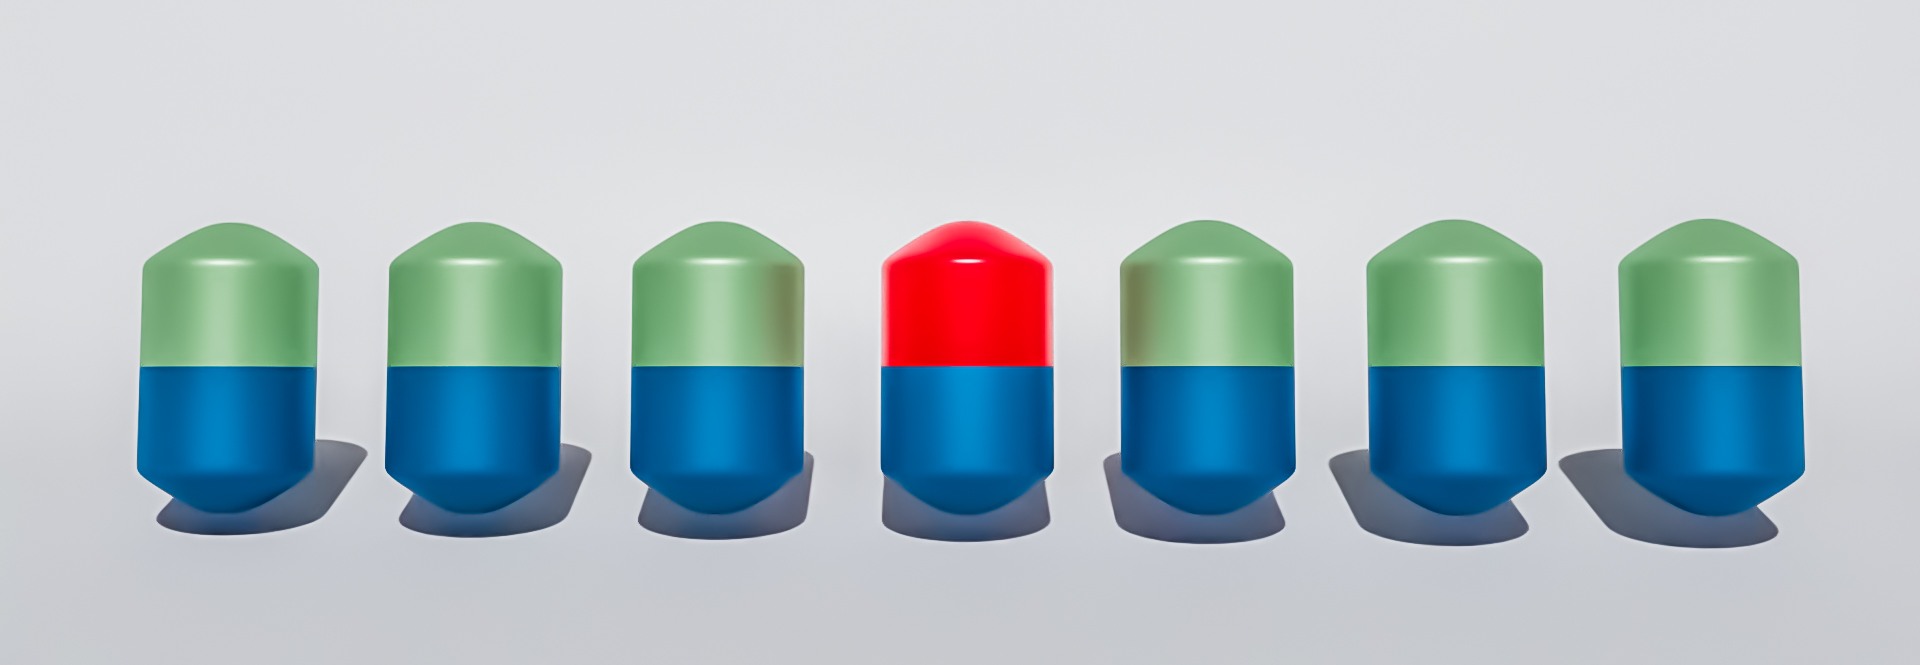 Impurity Analysis. 3D render of capsules one with highlighted red cap instead of green cap